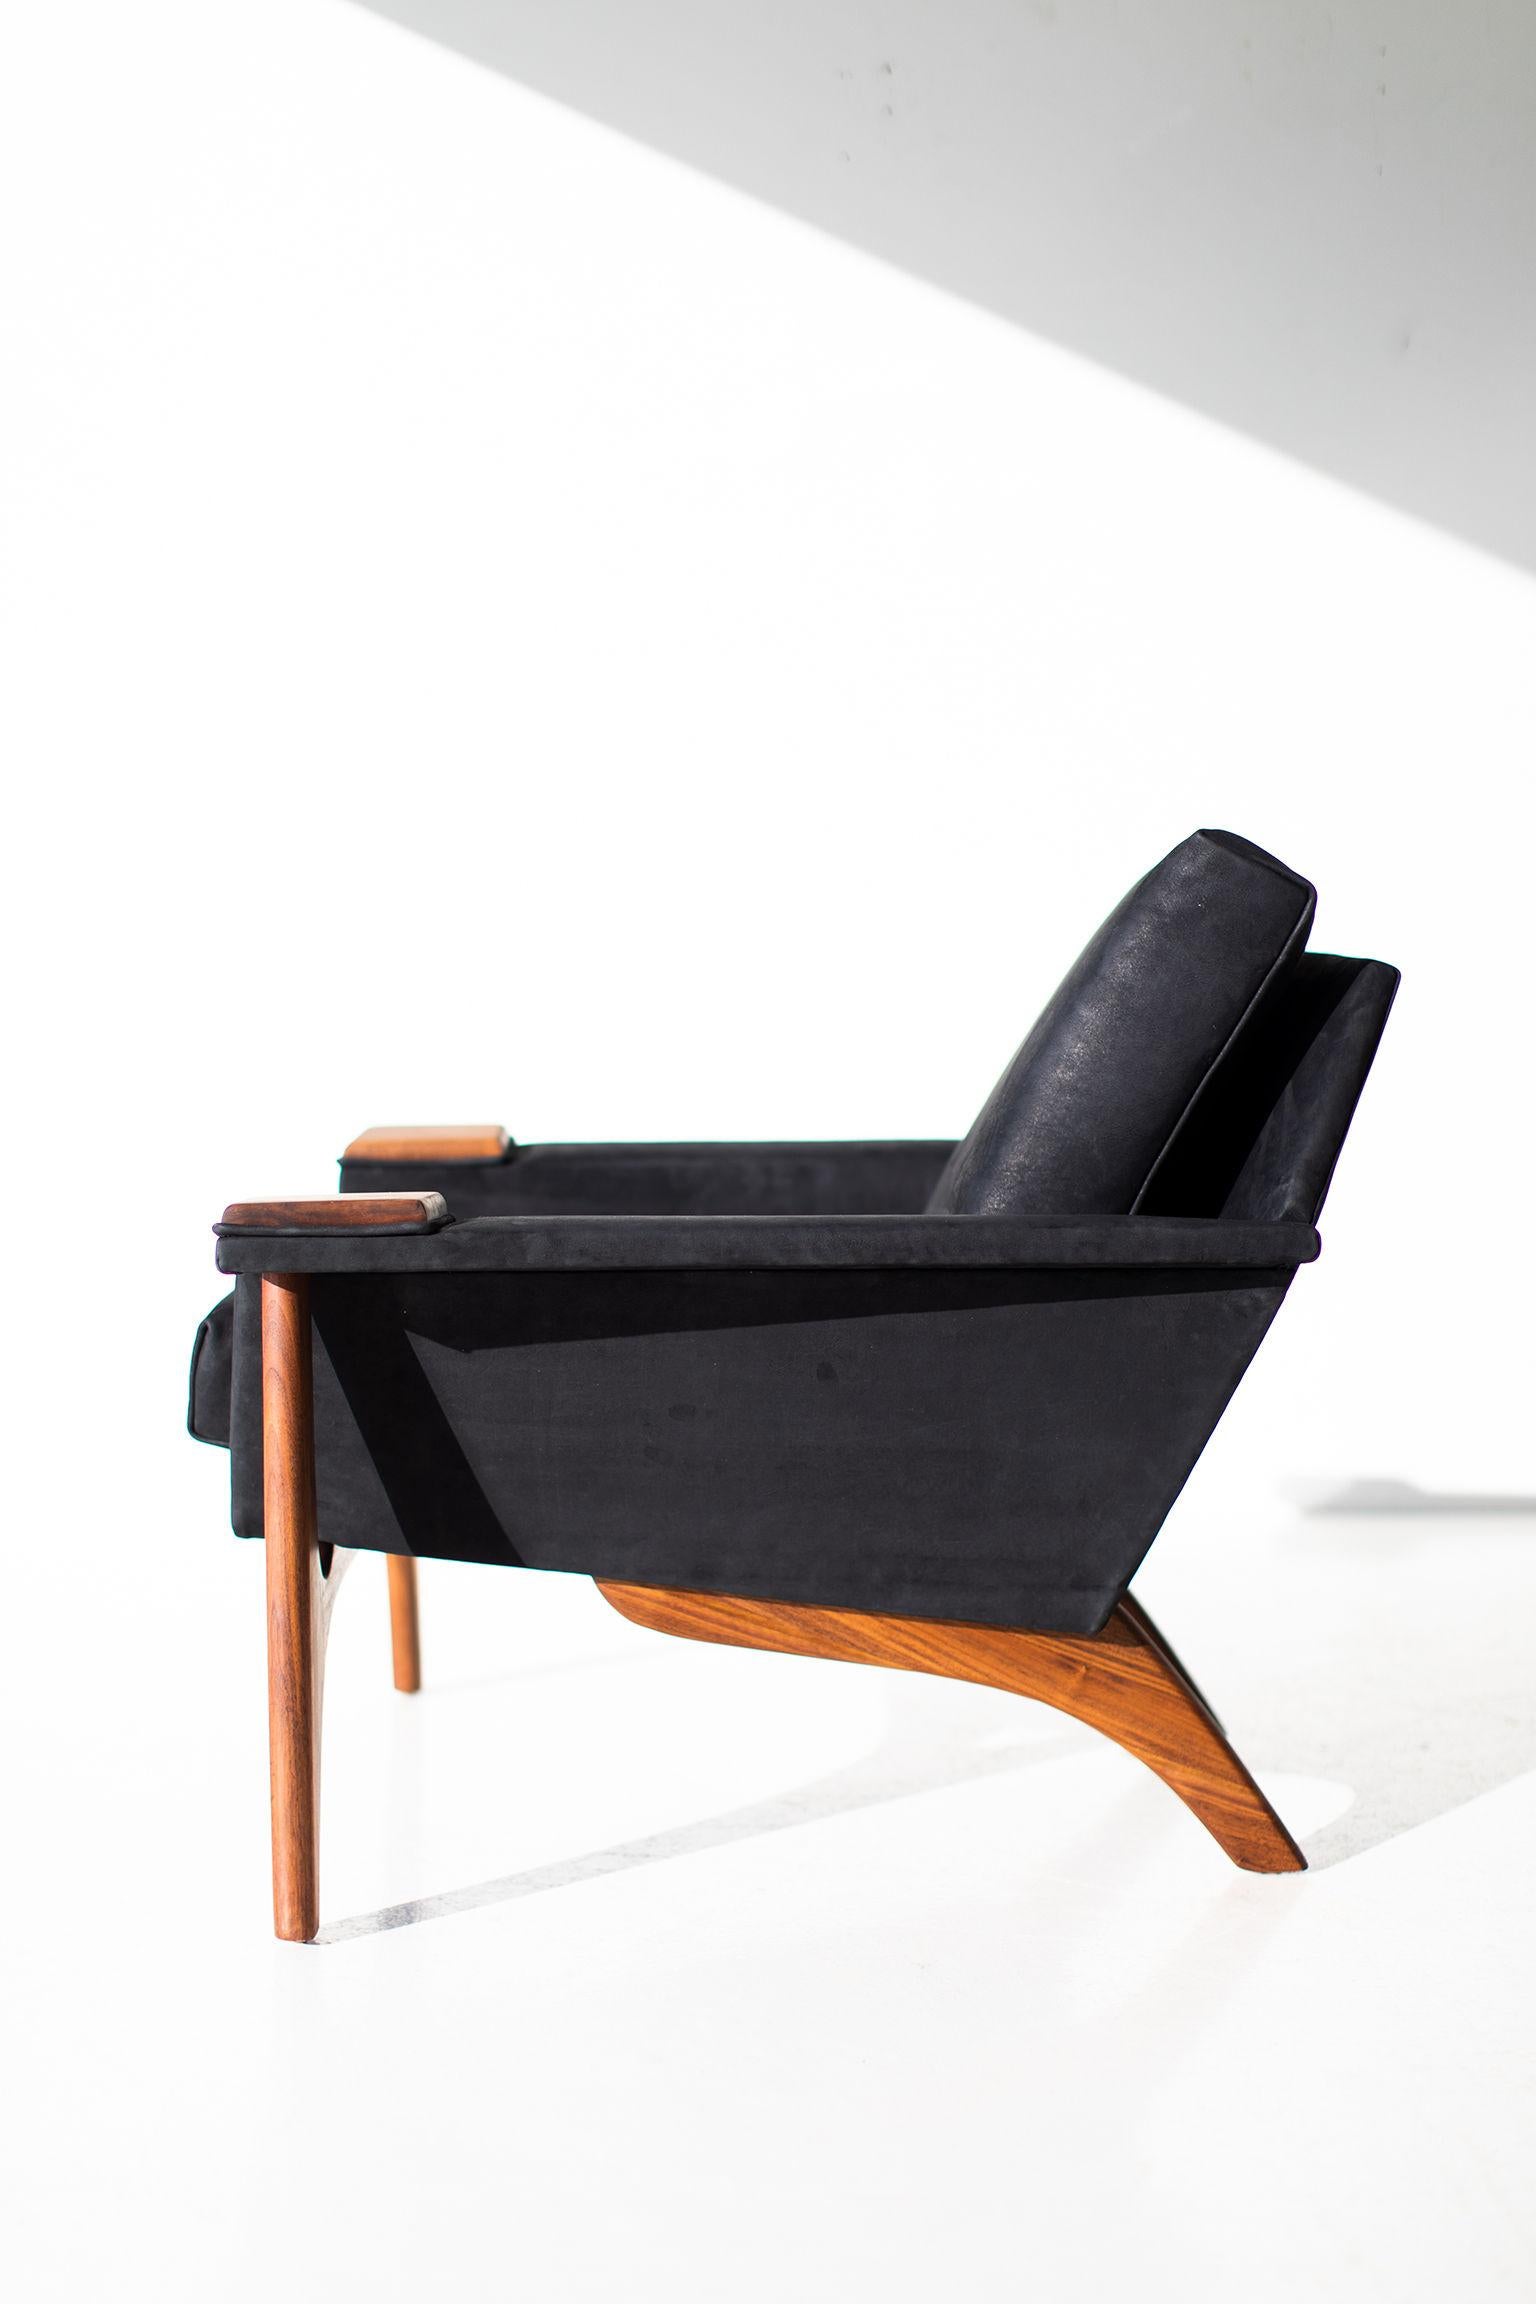 Mid-Century Modern Adrian Pearsall Leather Lounge Chair for Craft Associates Inc.